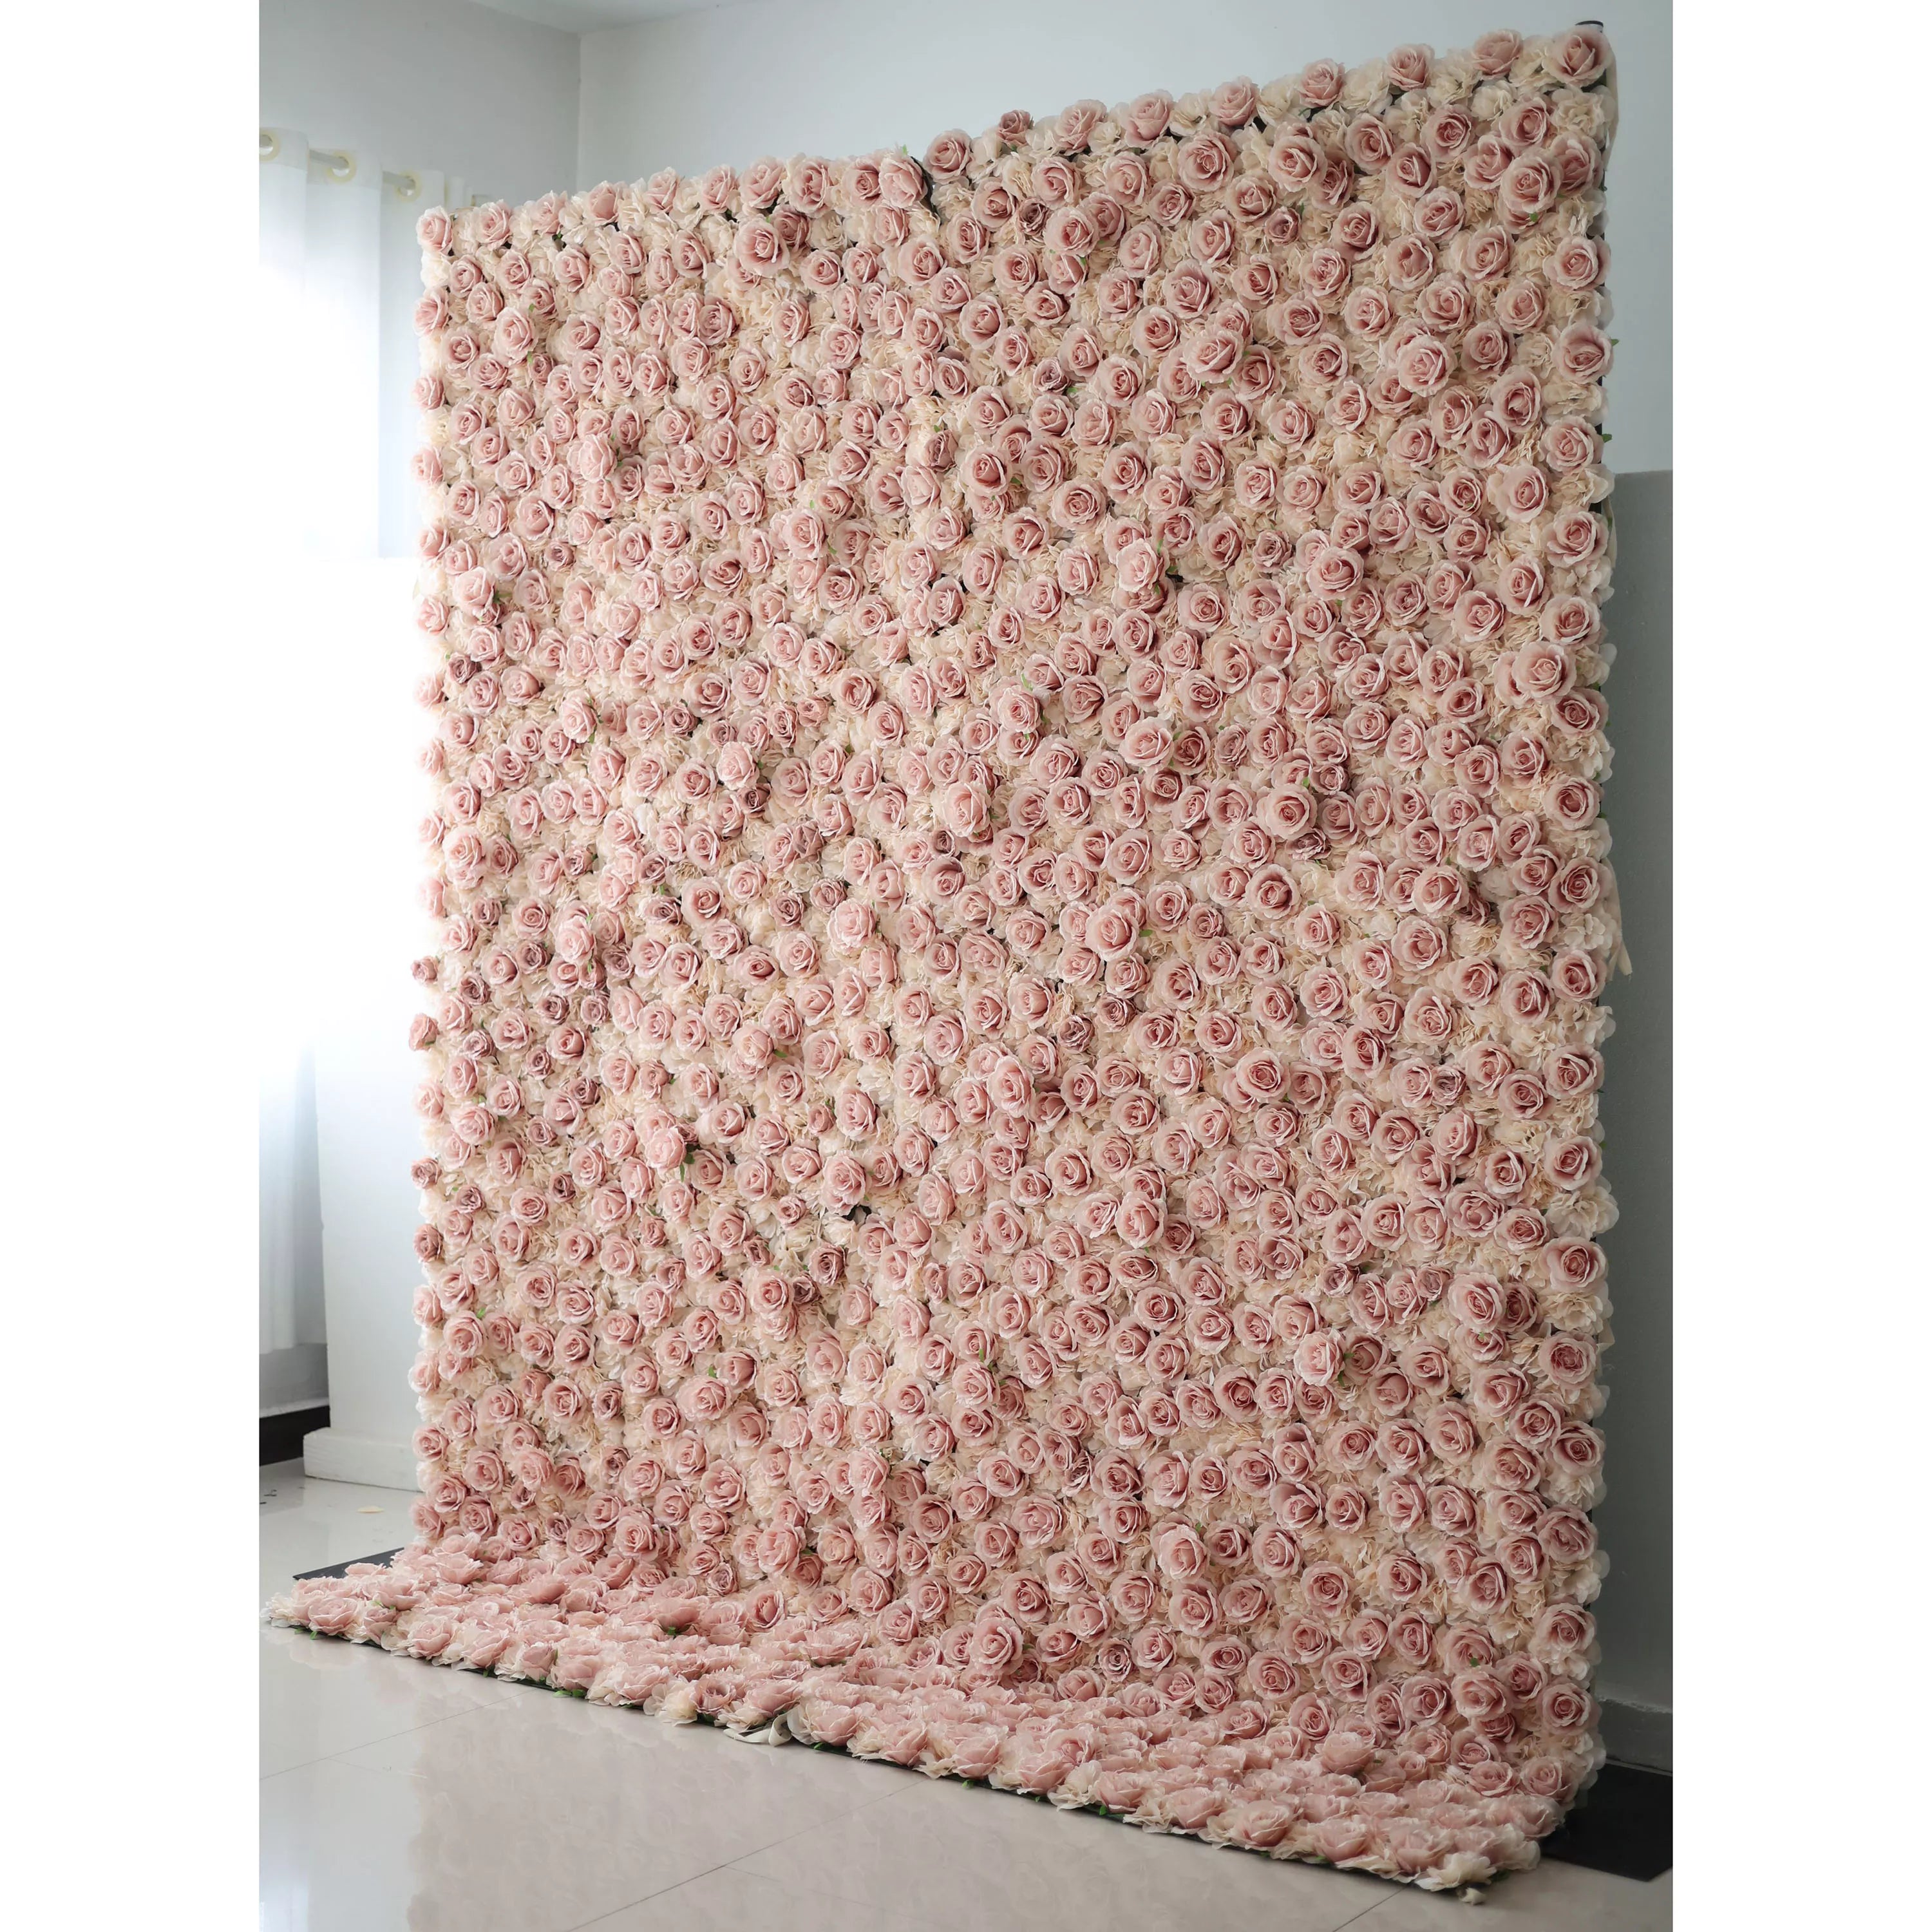 Valar Flowers' Artificial Fabric Flower Wall: Serene Rose Whispers. Dive into a sea of blushing pink blossoms. This sophisticated arrangement captures the essence of romantic ambiance, perfect for events desiring timeless beauty and floral elegance.